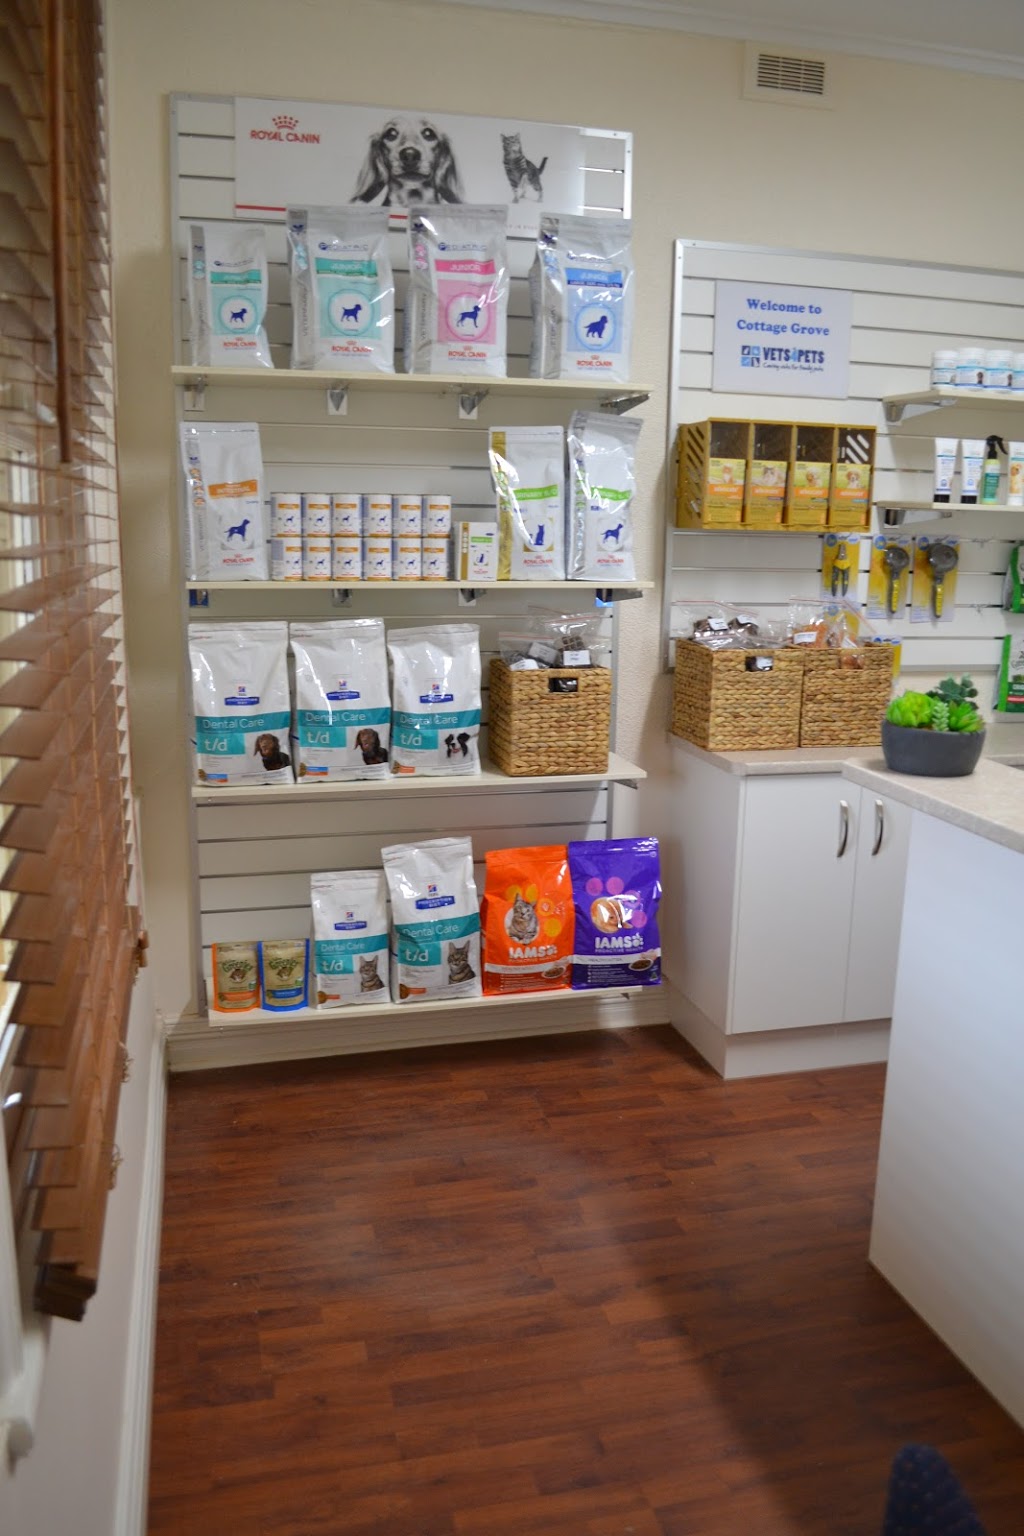 Vets4Pets Cottage Grove Veterinary Centre | veterinary care | 1375 Golden Grove Rd, Golden Grove SA 5125, Australia | 0881555695 OR +61 8 8155 5695